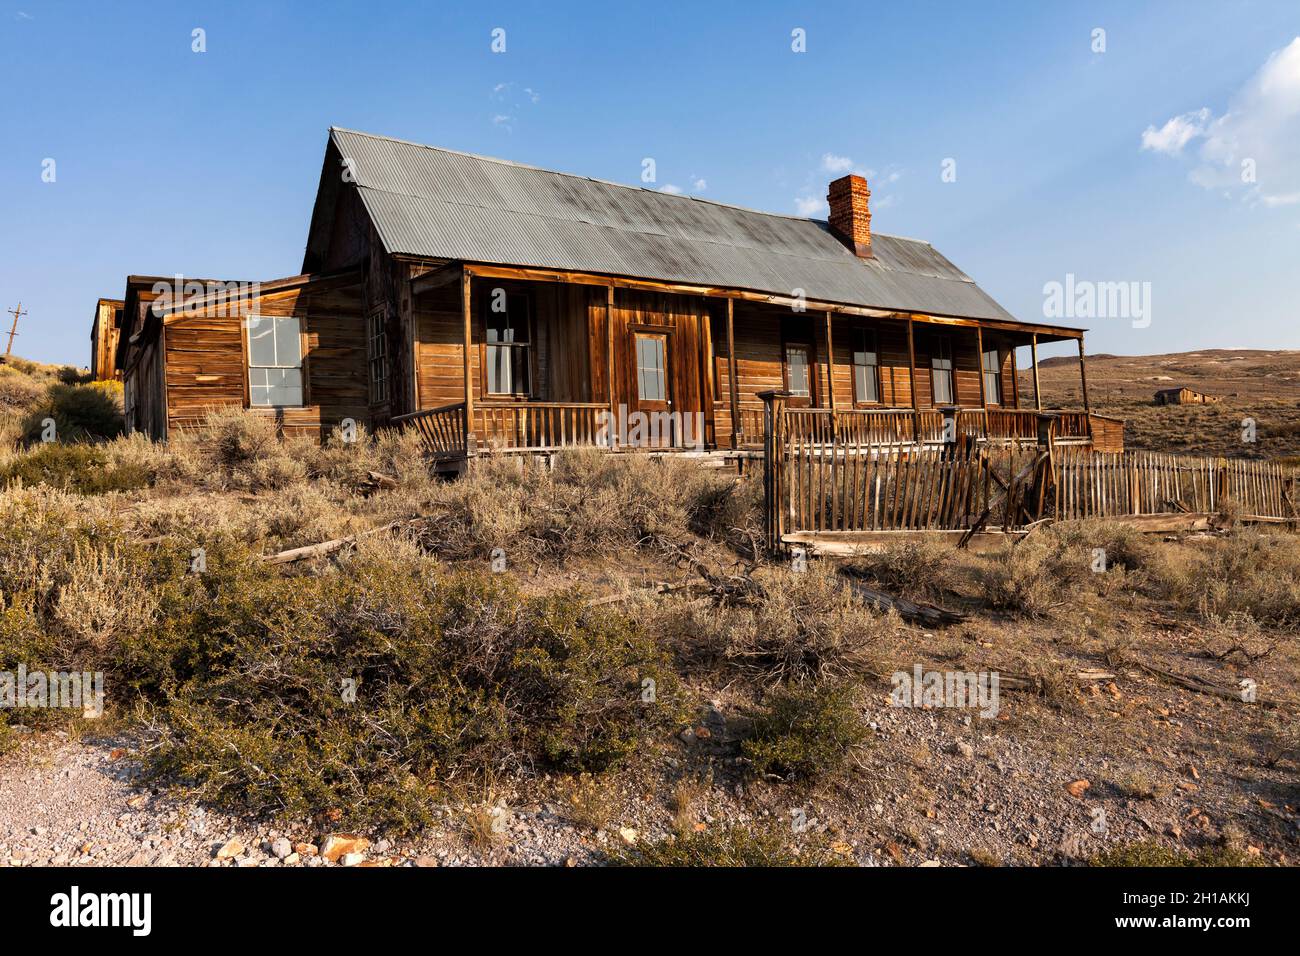 The Hoover House in Bodie, California was once the residence of the manager of the Standard Mill, Theodore Hoover, and his wife Mildred. Theodore was Stock Photo